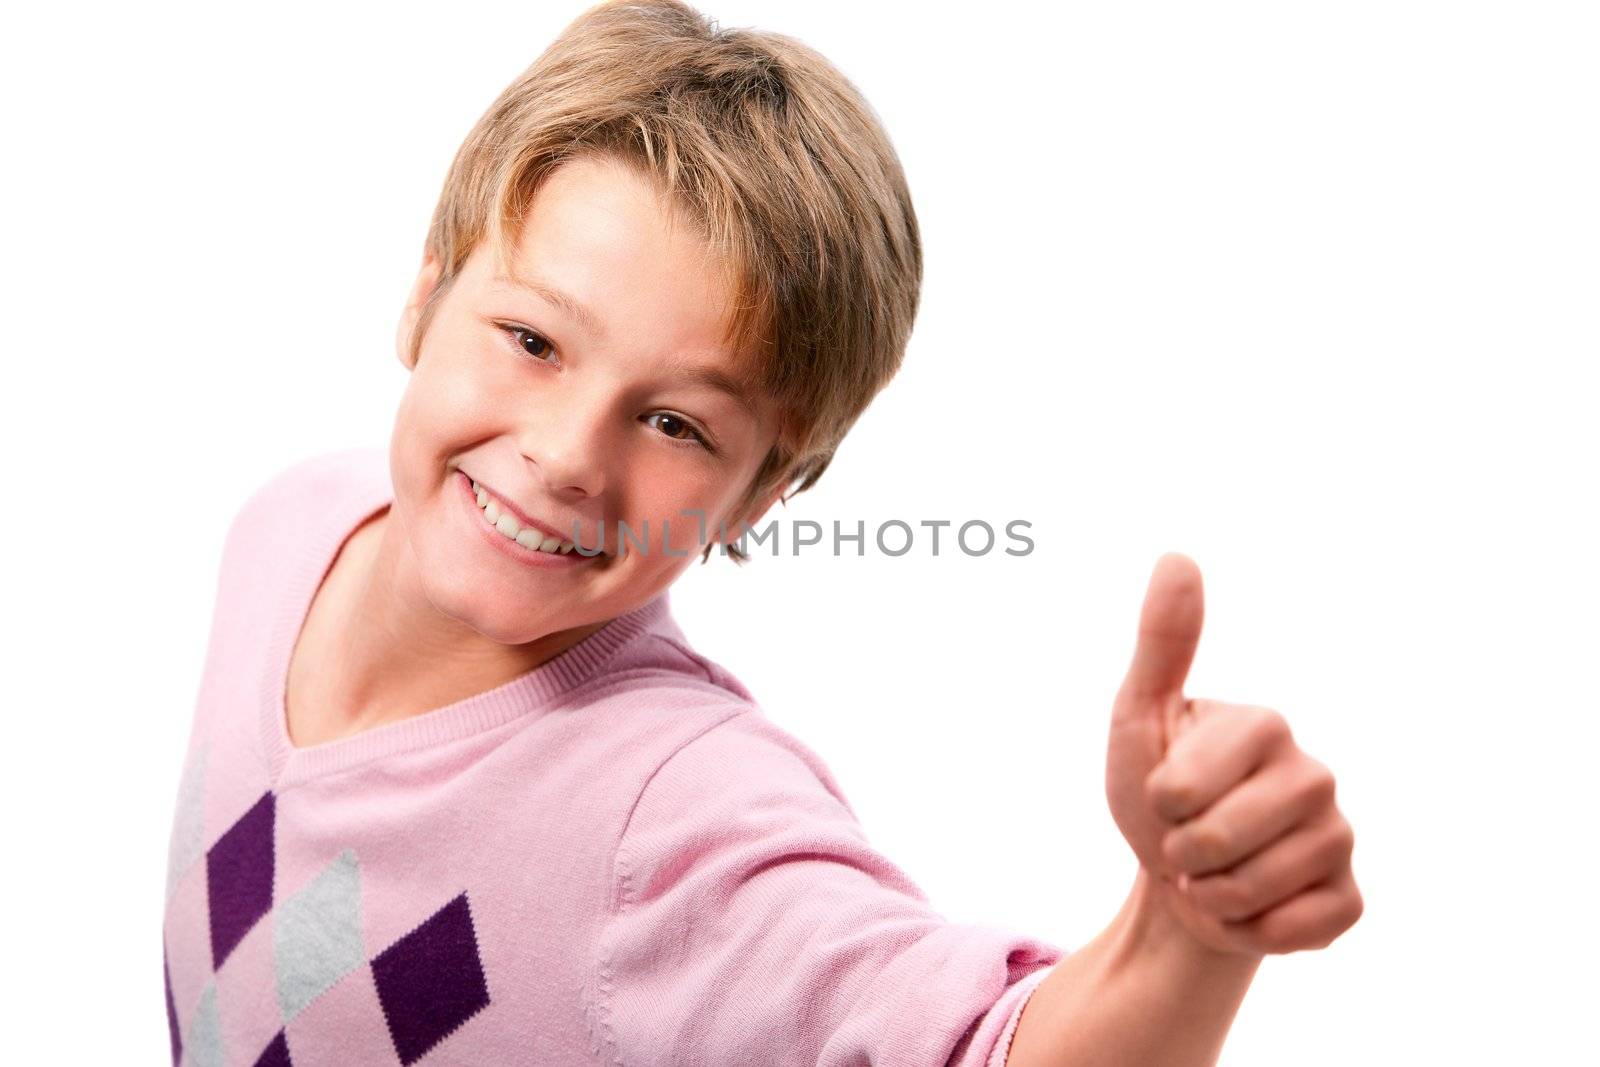 Portrait of young handsome boy showing thumbs up isolated on white background